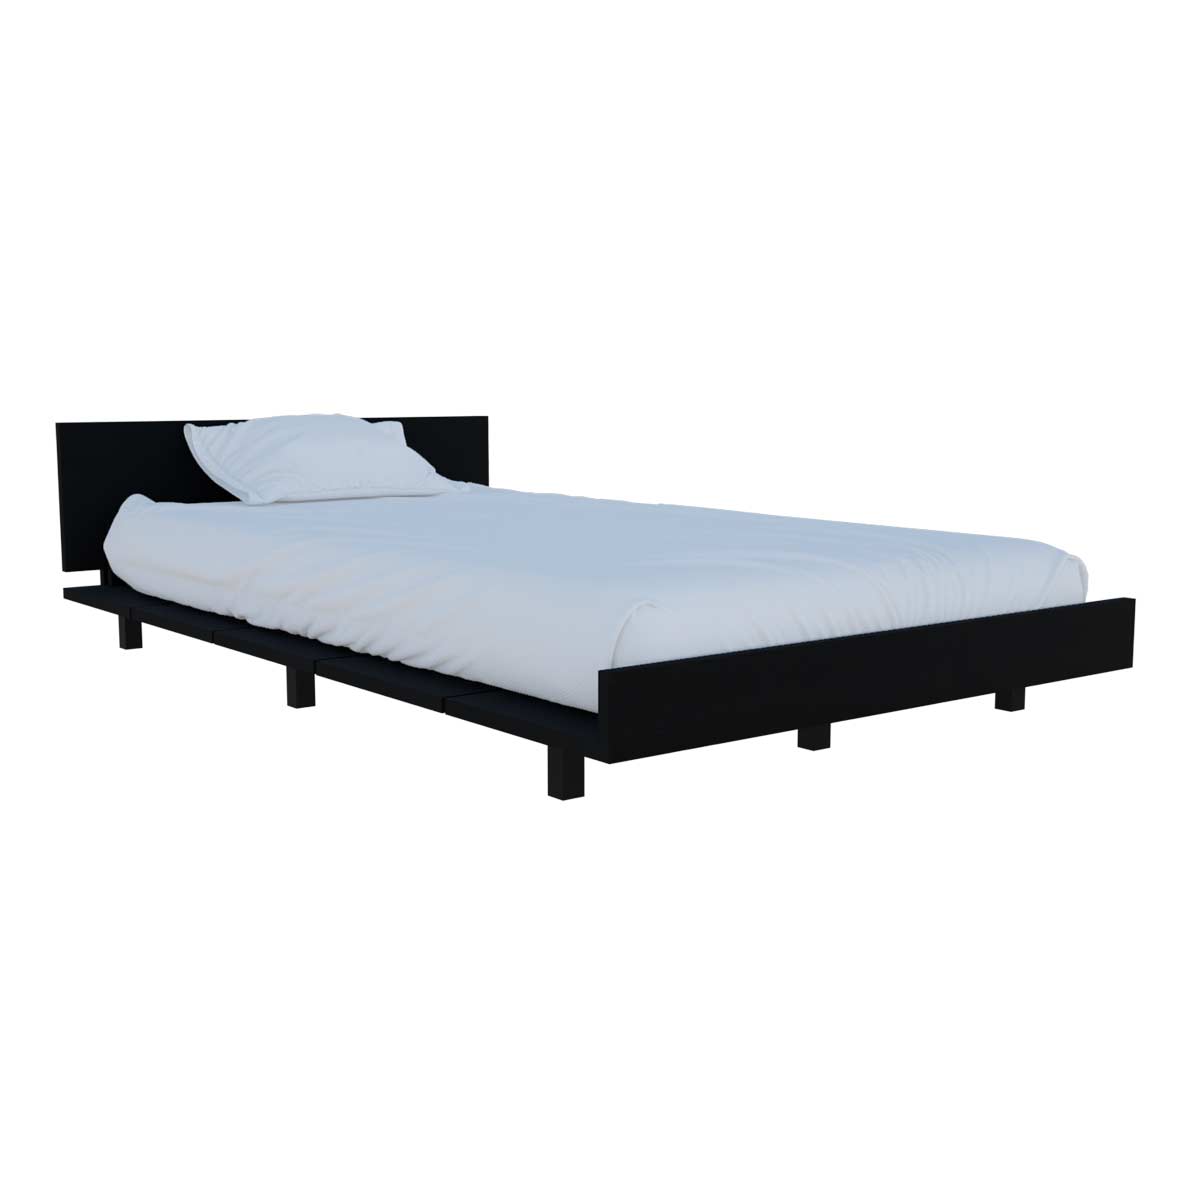 CLW-7974-KAIA-TWIN-BED-FRAME-BLACK-(3C)-WENGUE-LATERAL-DECORADO